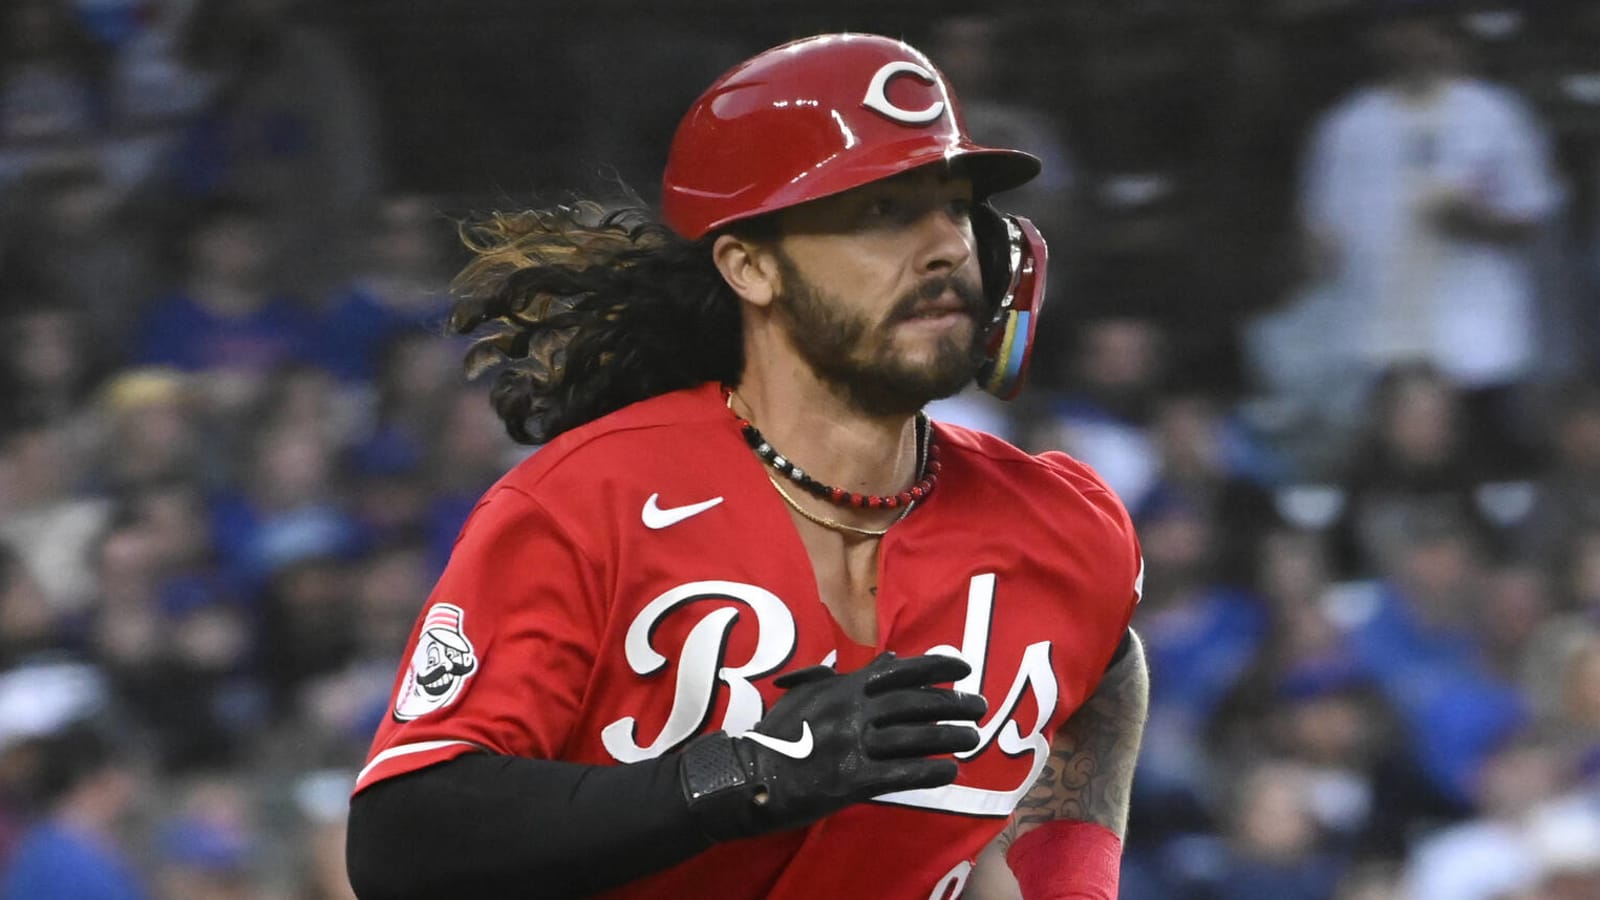 Reds disinclined to trade former Rookie of the Year